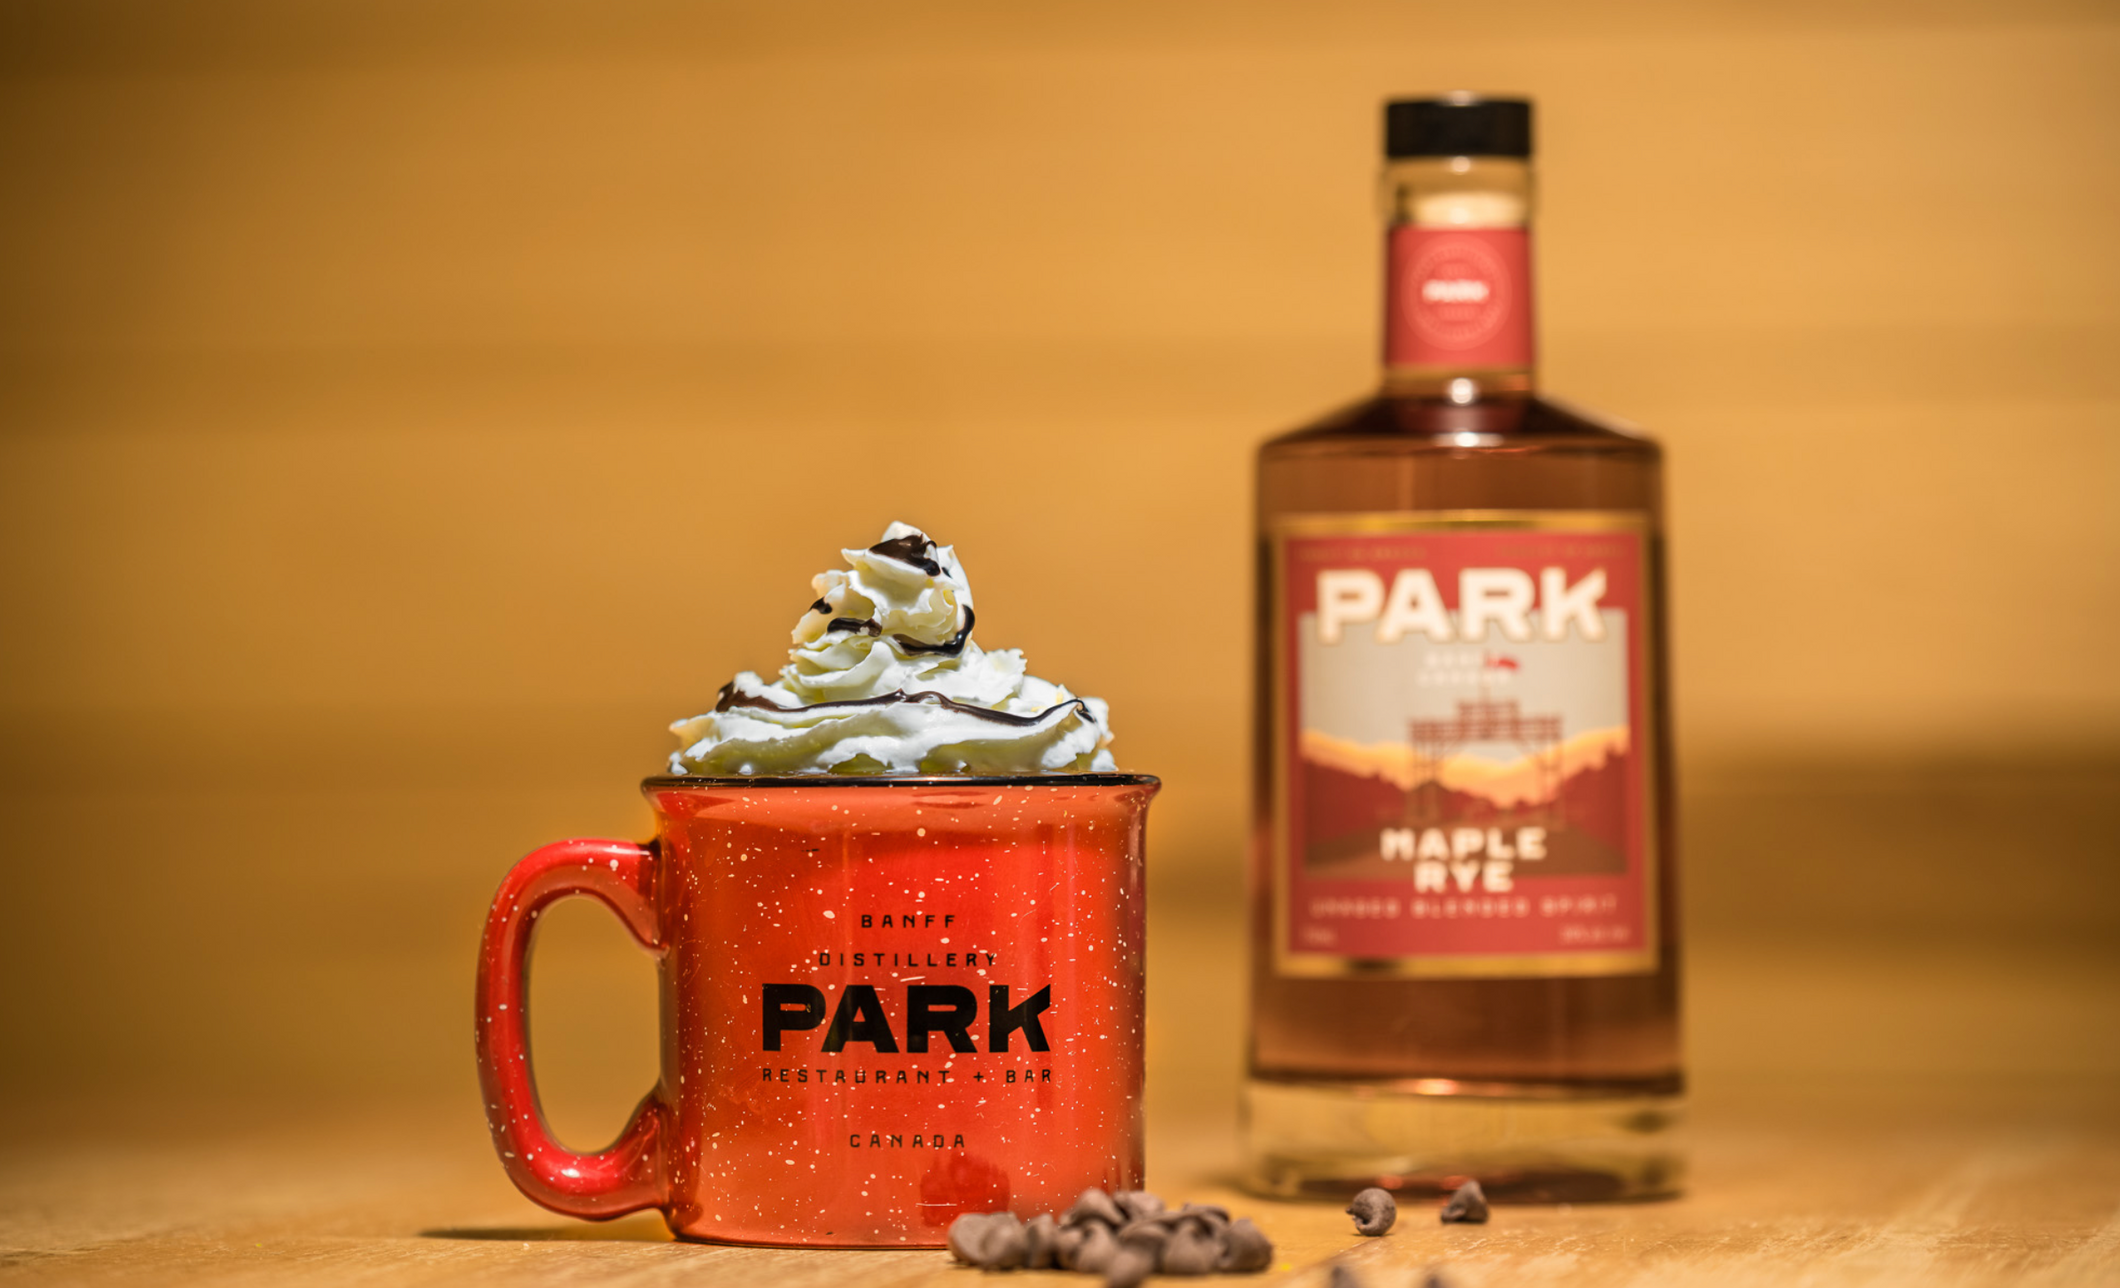 A hot chocolate in a red mug with whipped cream on a wooden table beside a liquor bottle.